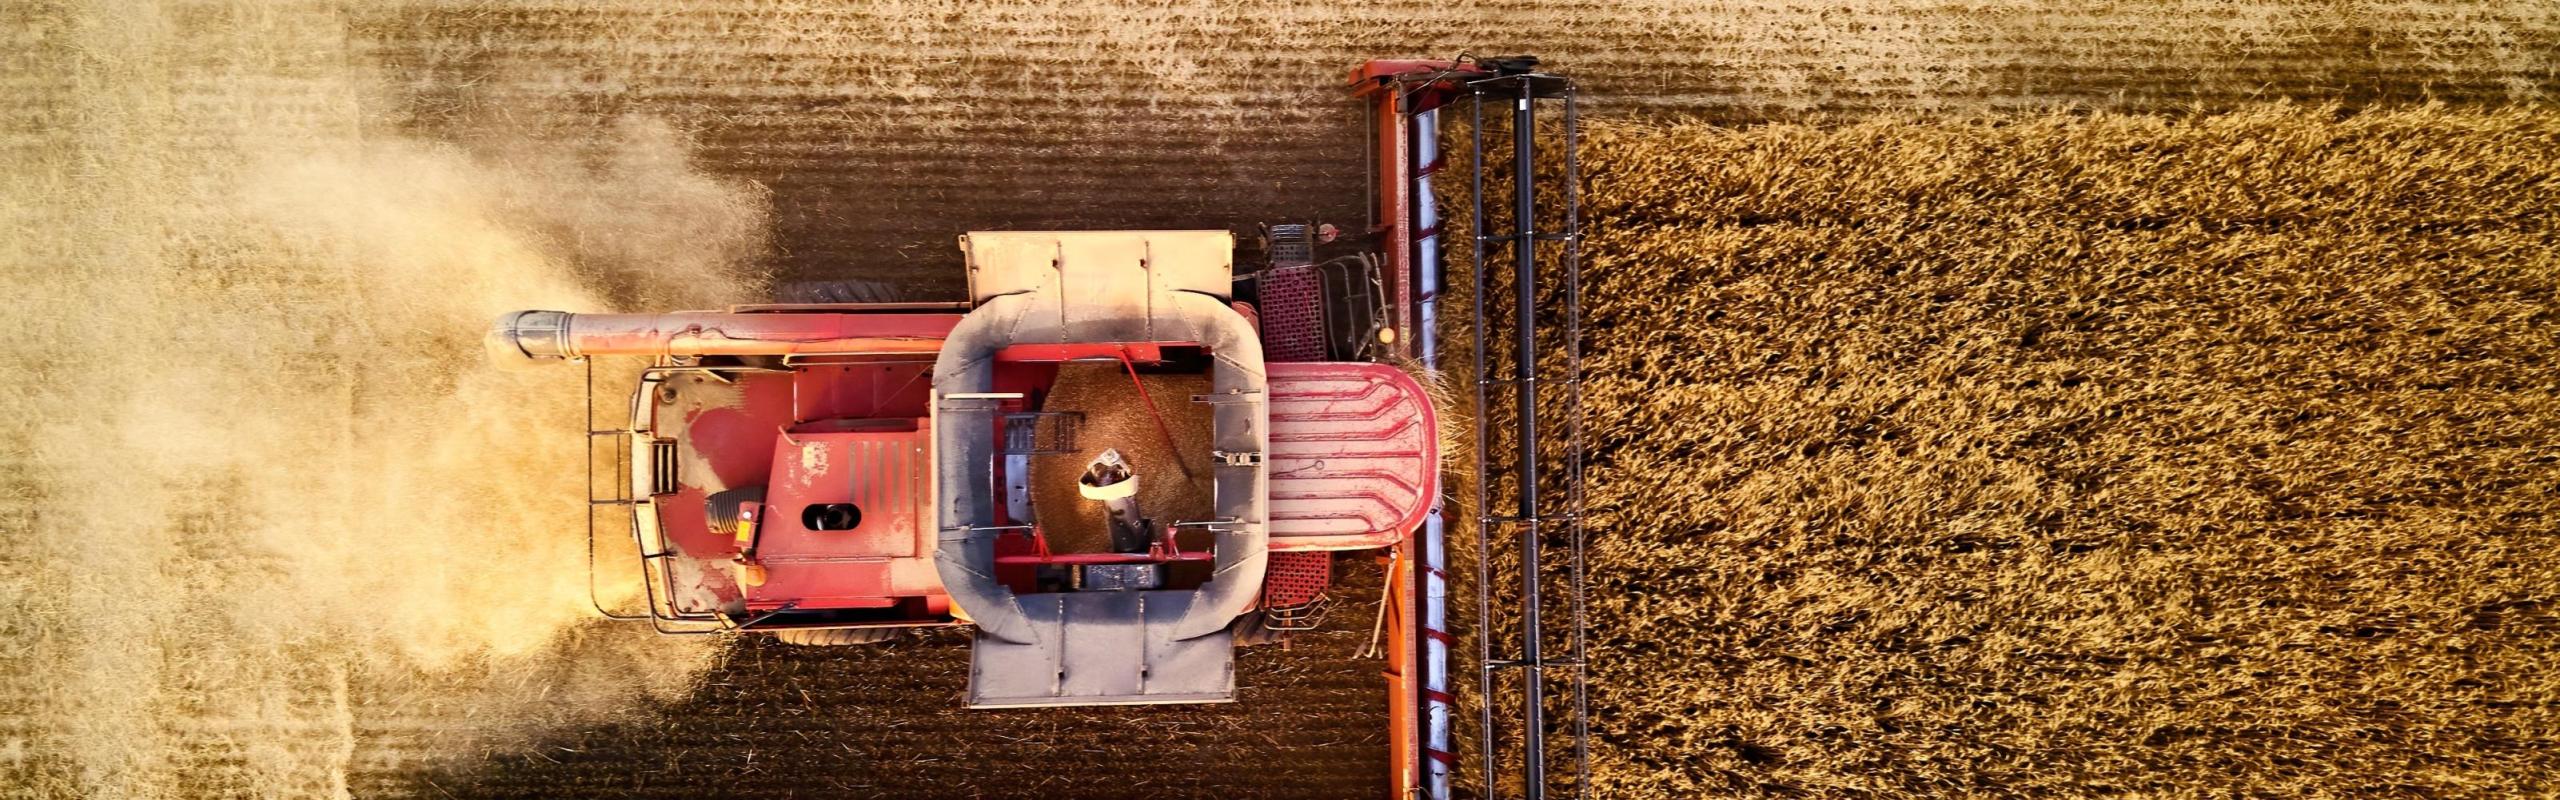 Aerial photo of red harvester working in wheat field at sunset. 